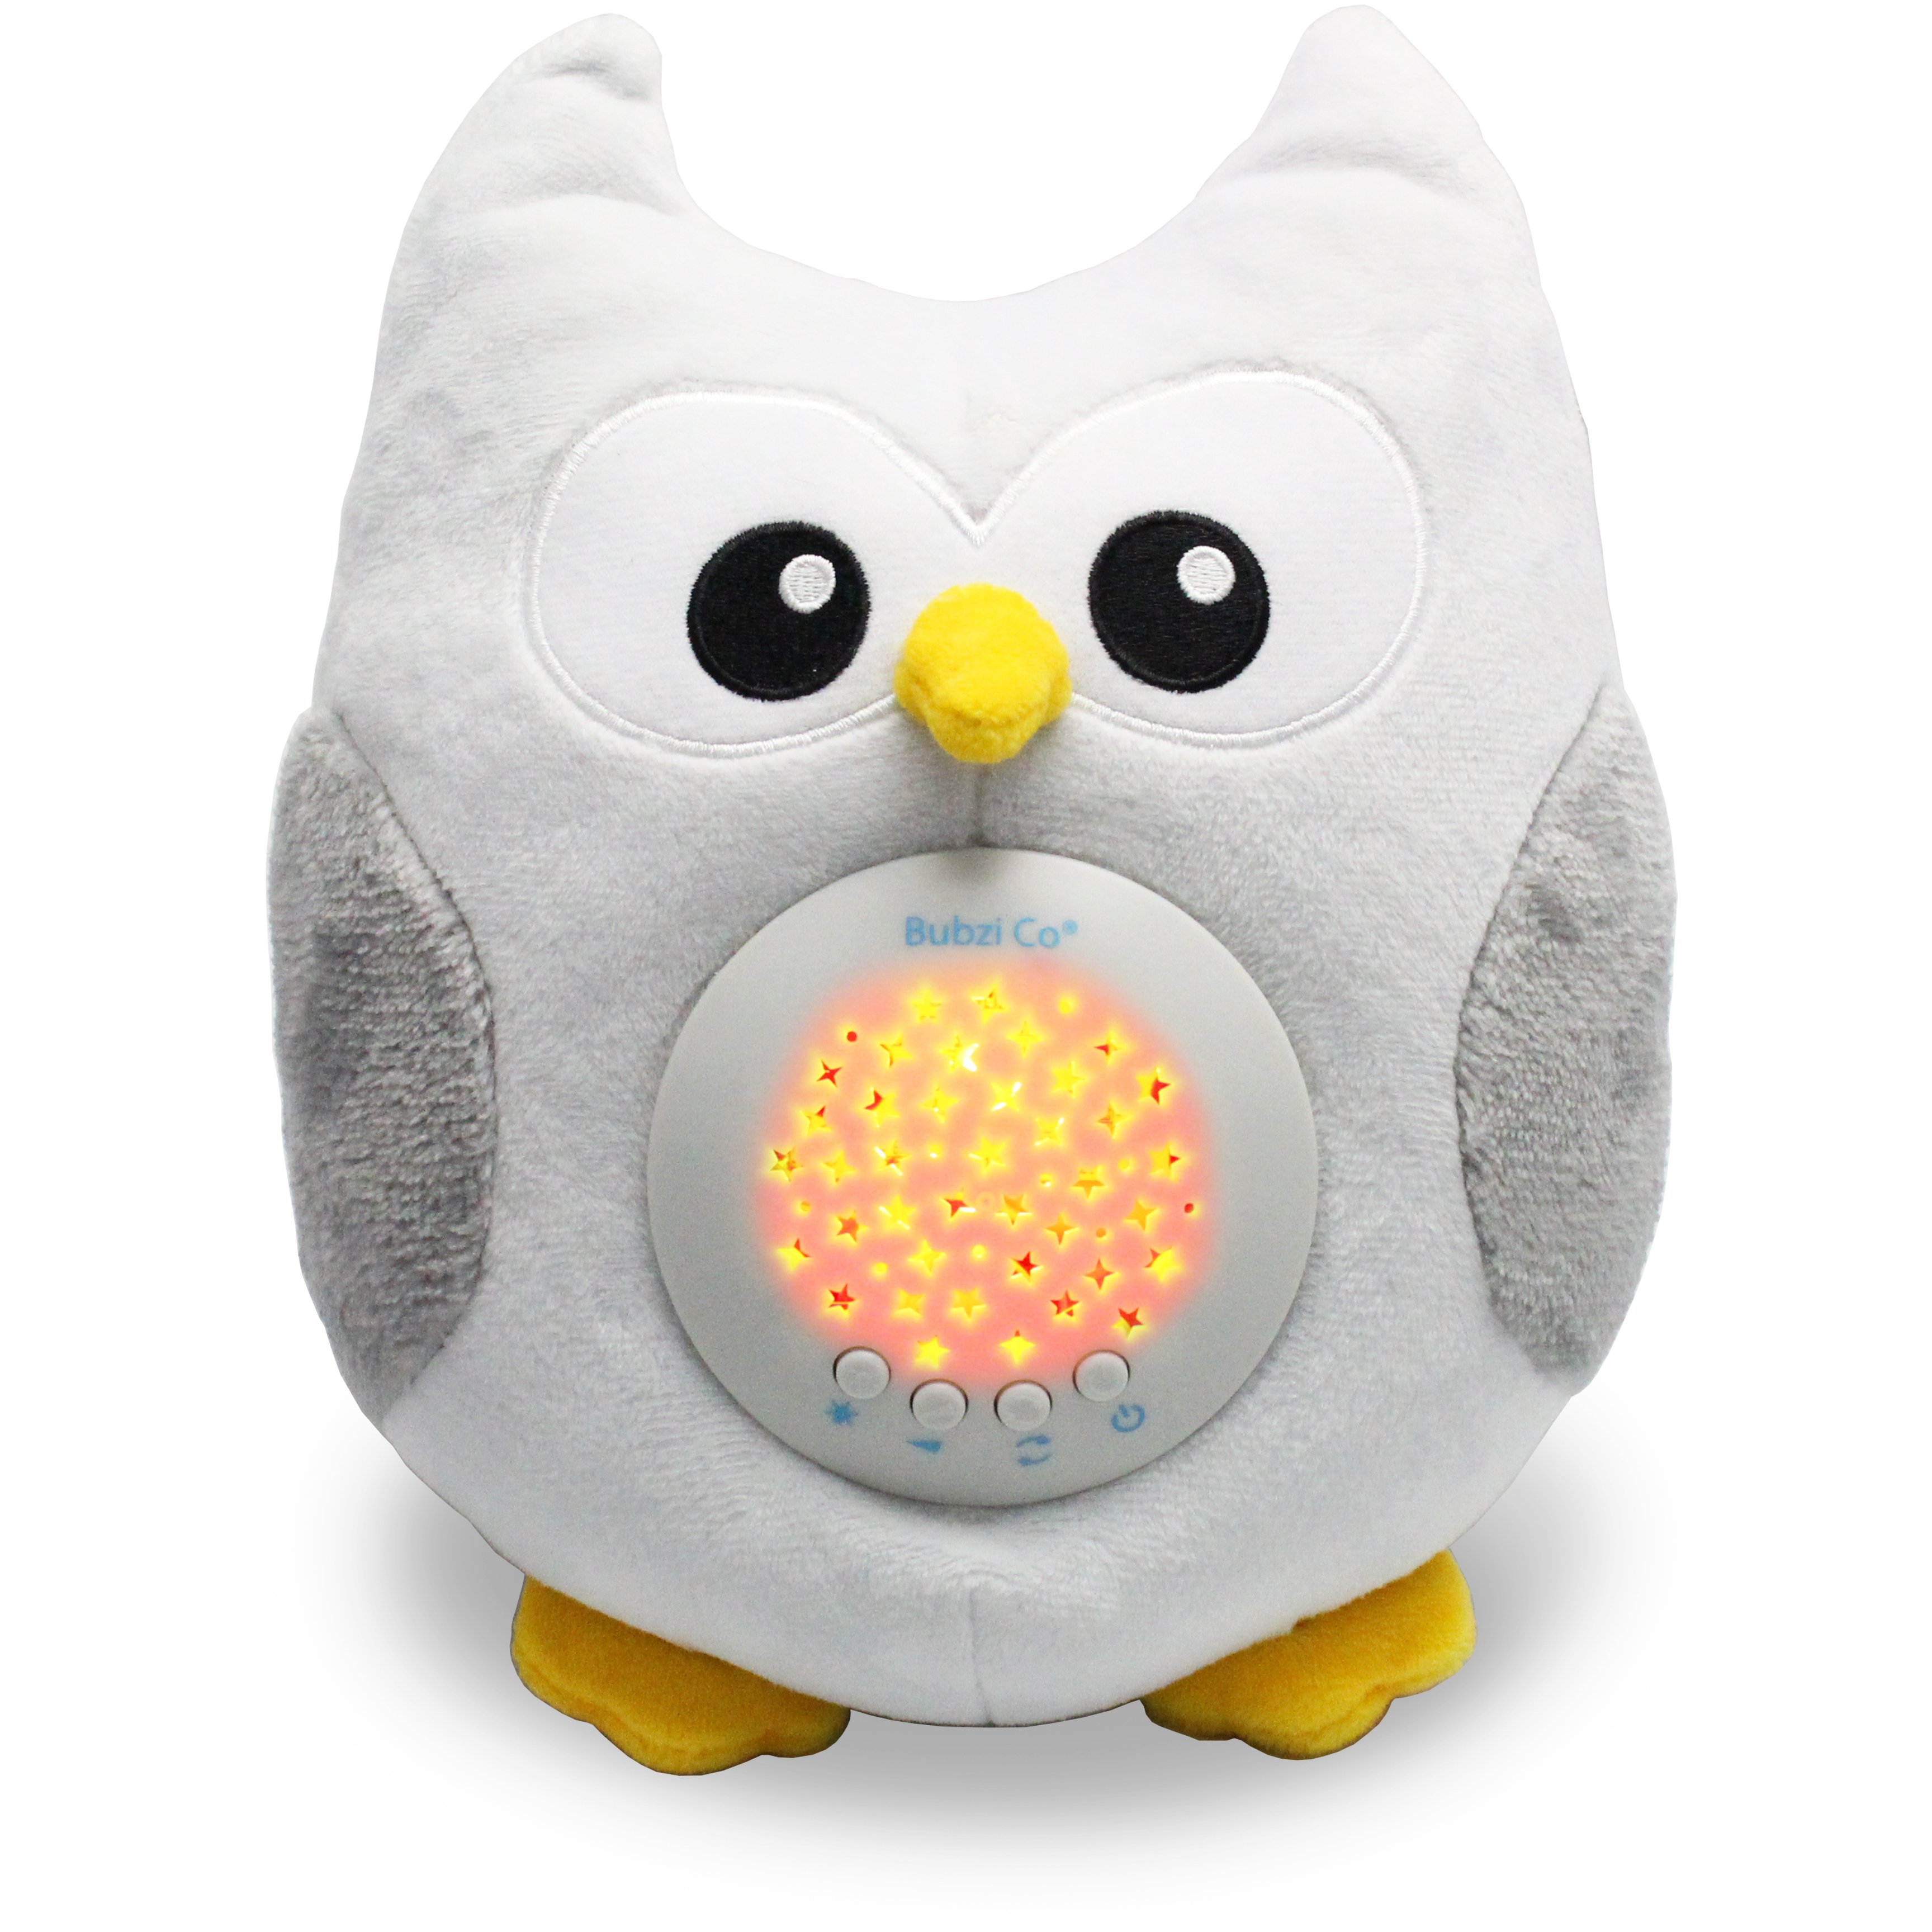 Bubzi Co Baby Sleep Soothing Owl with Night Stars Projector and Music